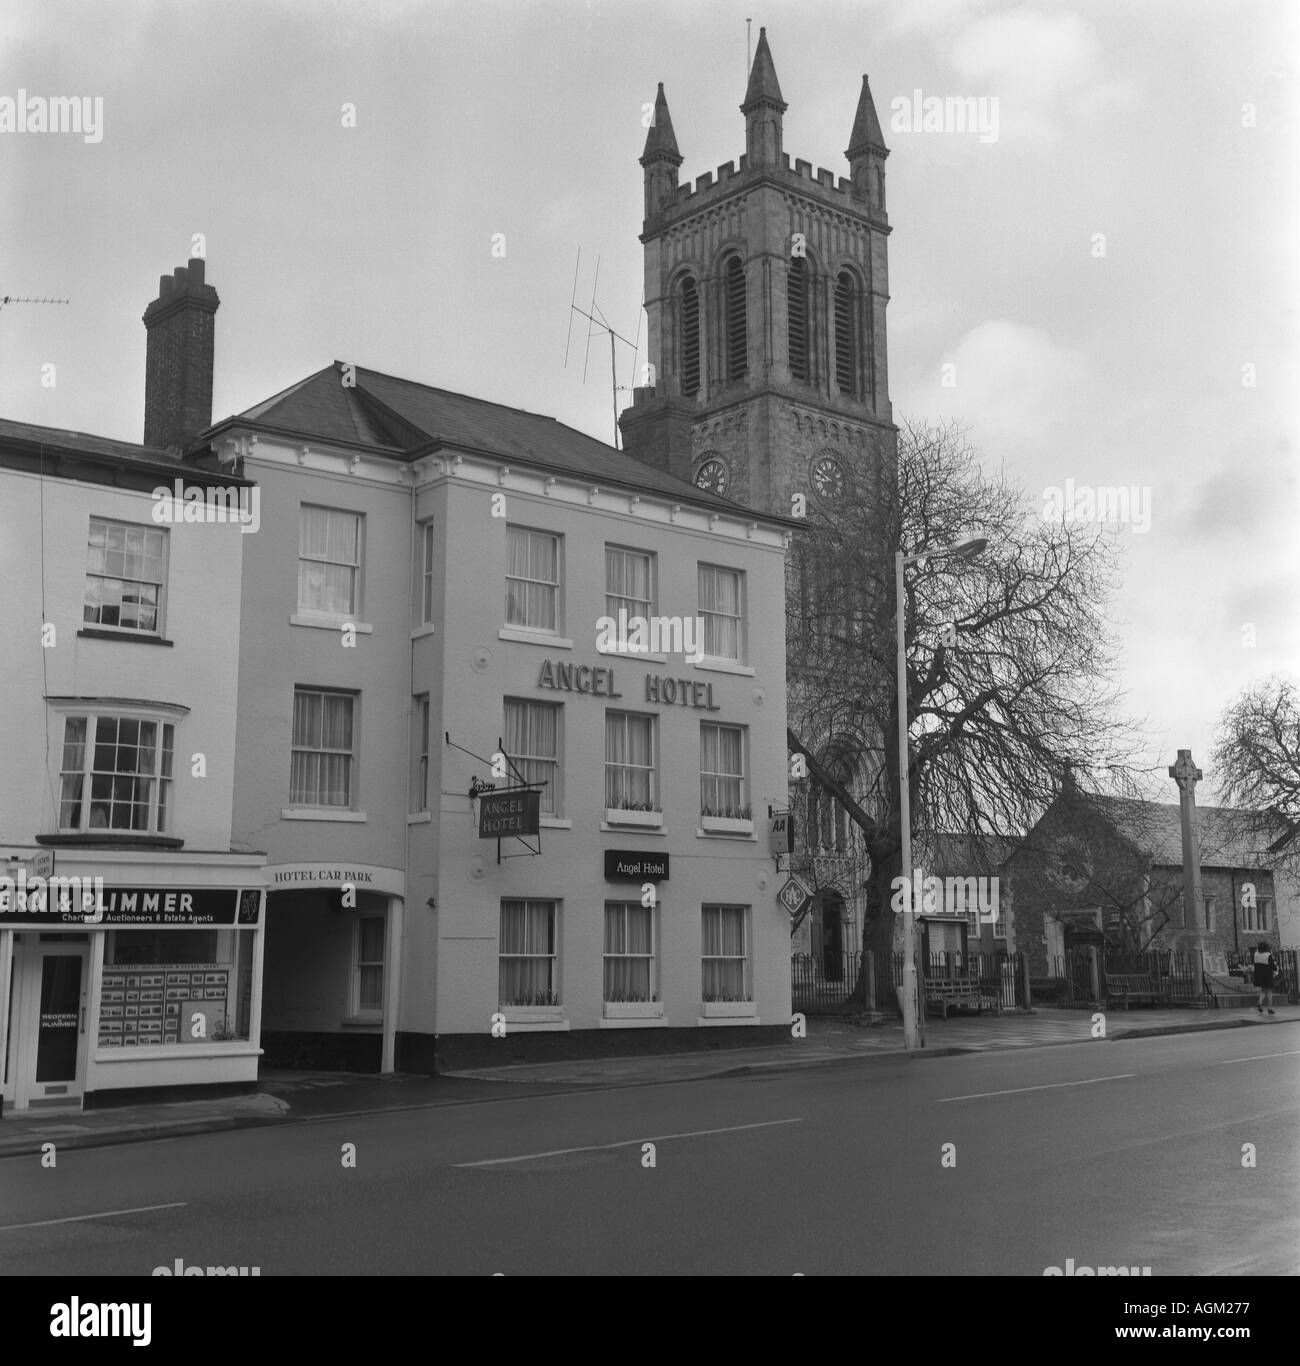 angel hotel public house honiton devon england pre 1973 in 6x6 number 0011 Stock Photo